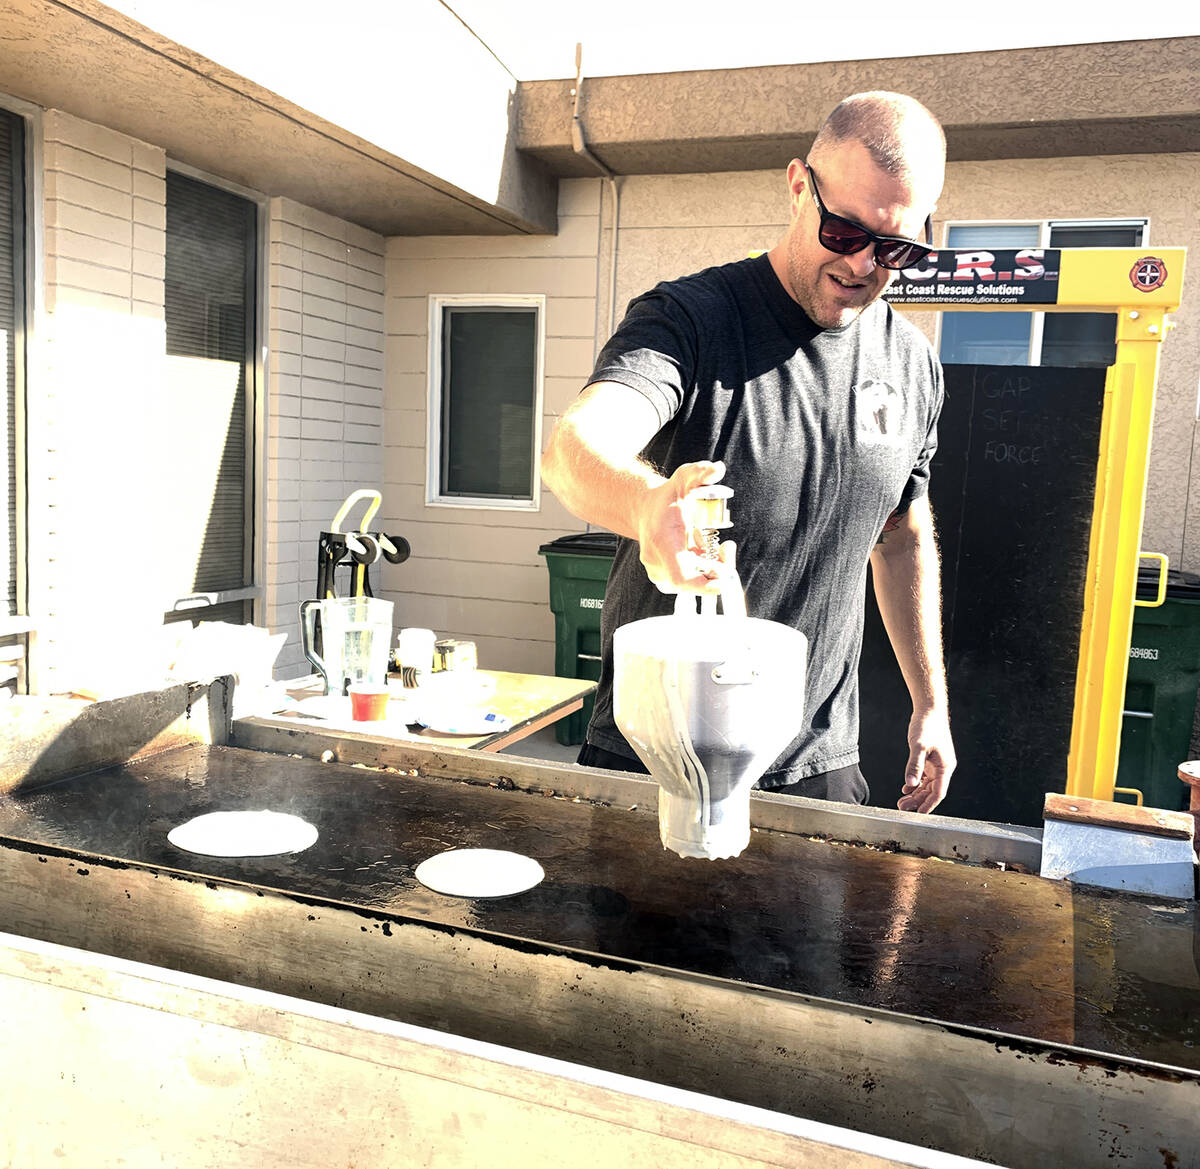 (Hali Bernstein Saylor/Boulder City Review) Firefighter Brandon Featherly makes pancakes for th ...